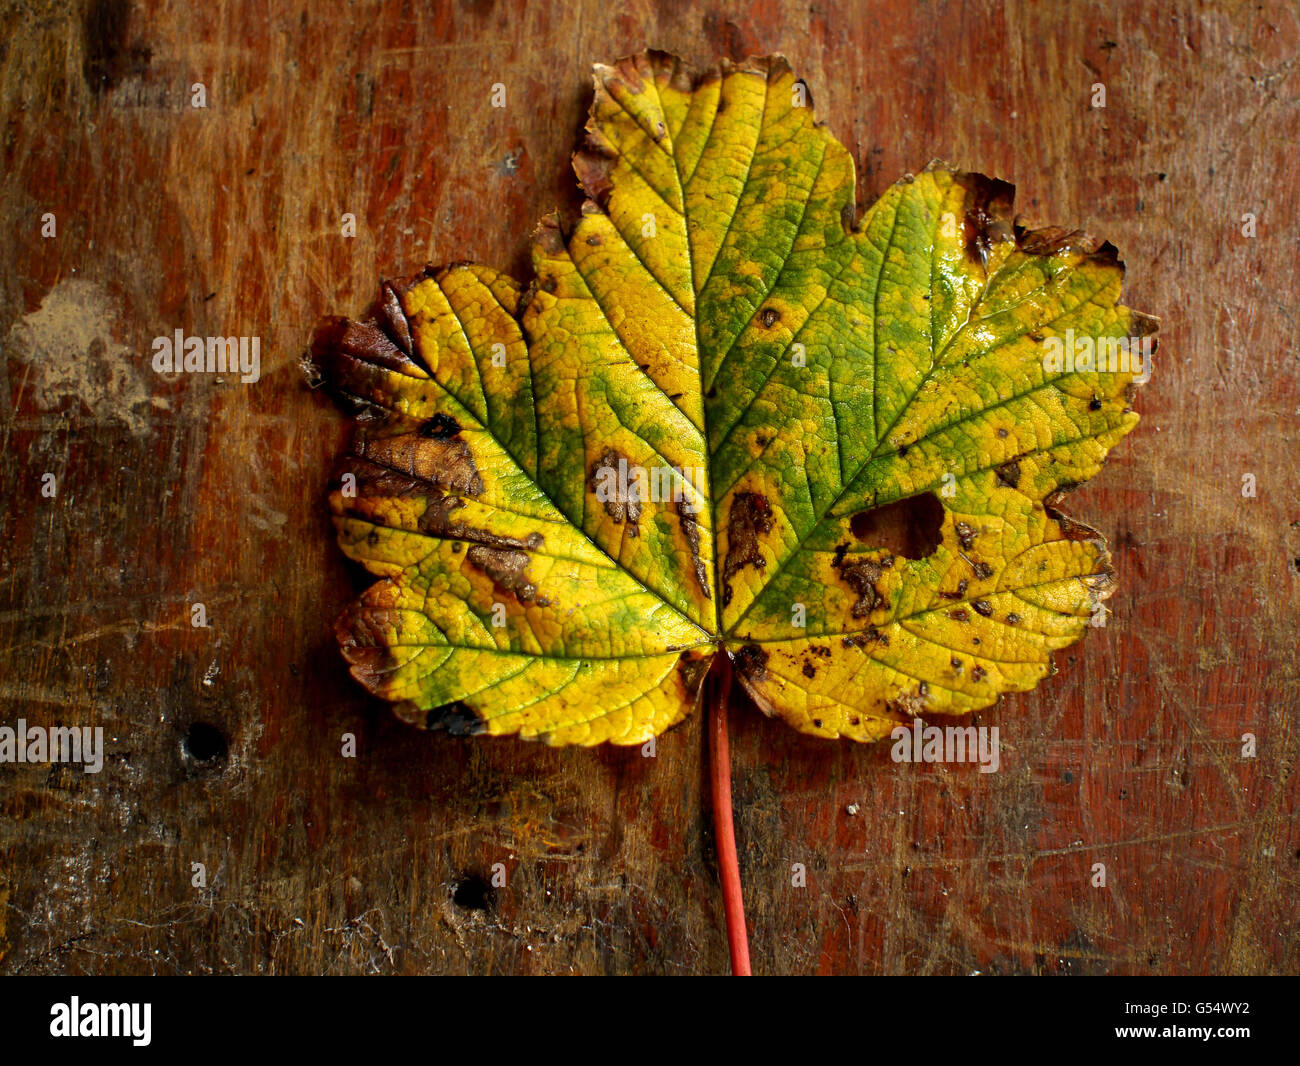 Autumnal Sycamore leaf on rustic wooden board Stock Photo